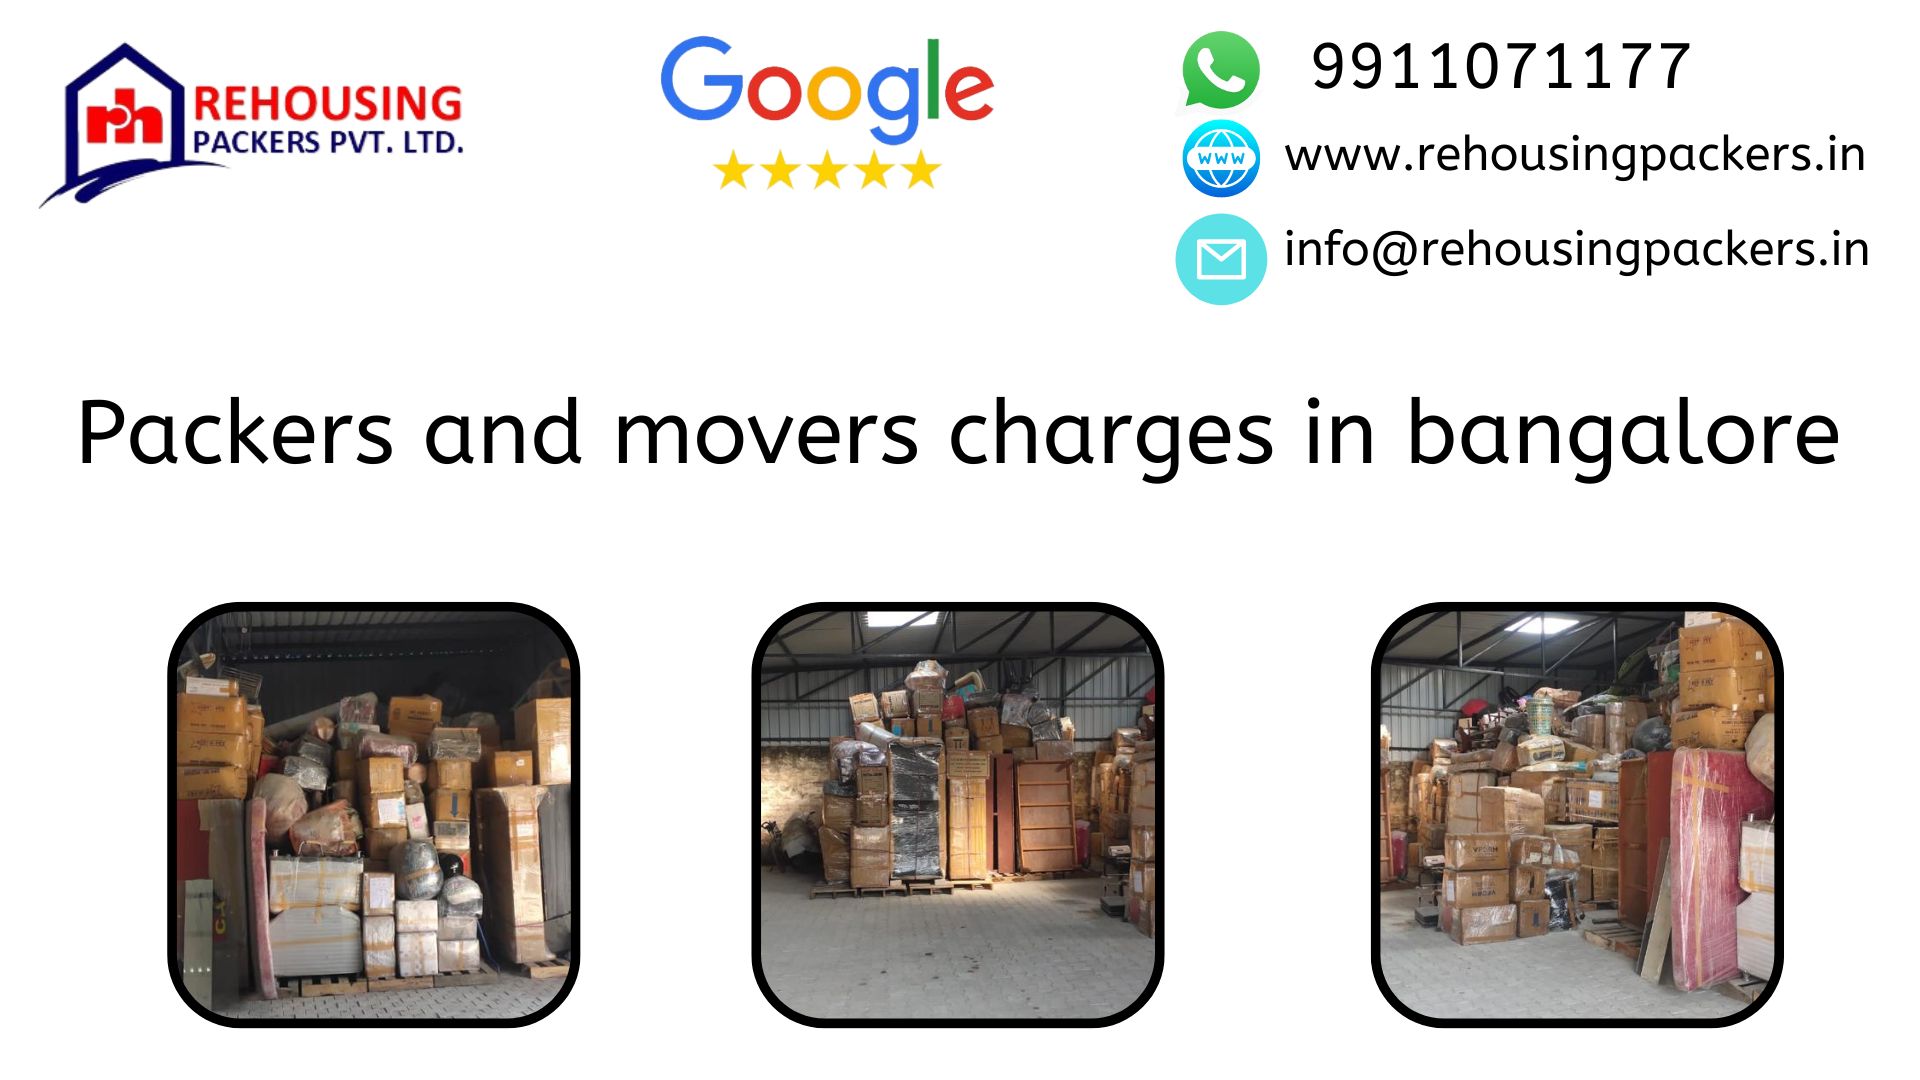 Online Packers and Movers Charges in Bangalore